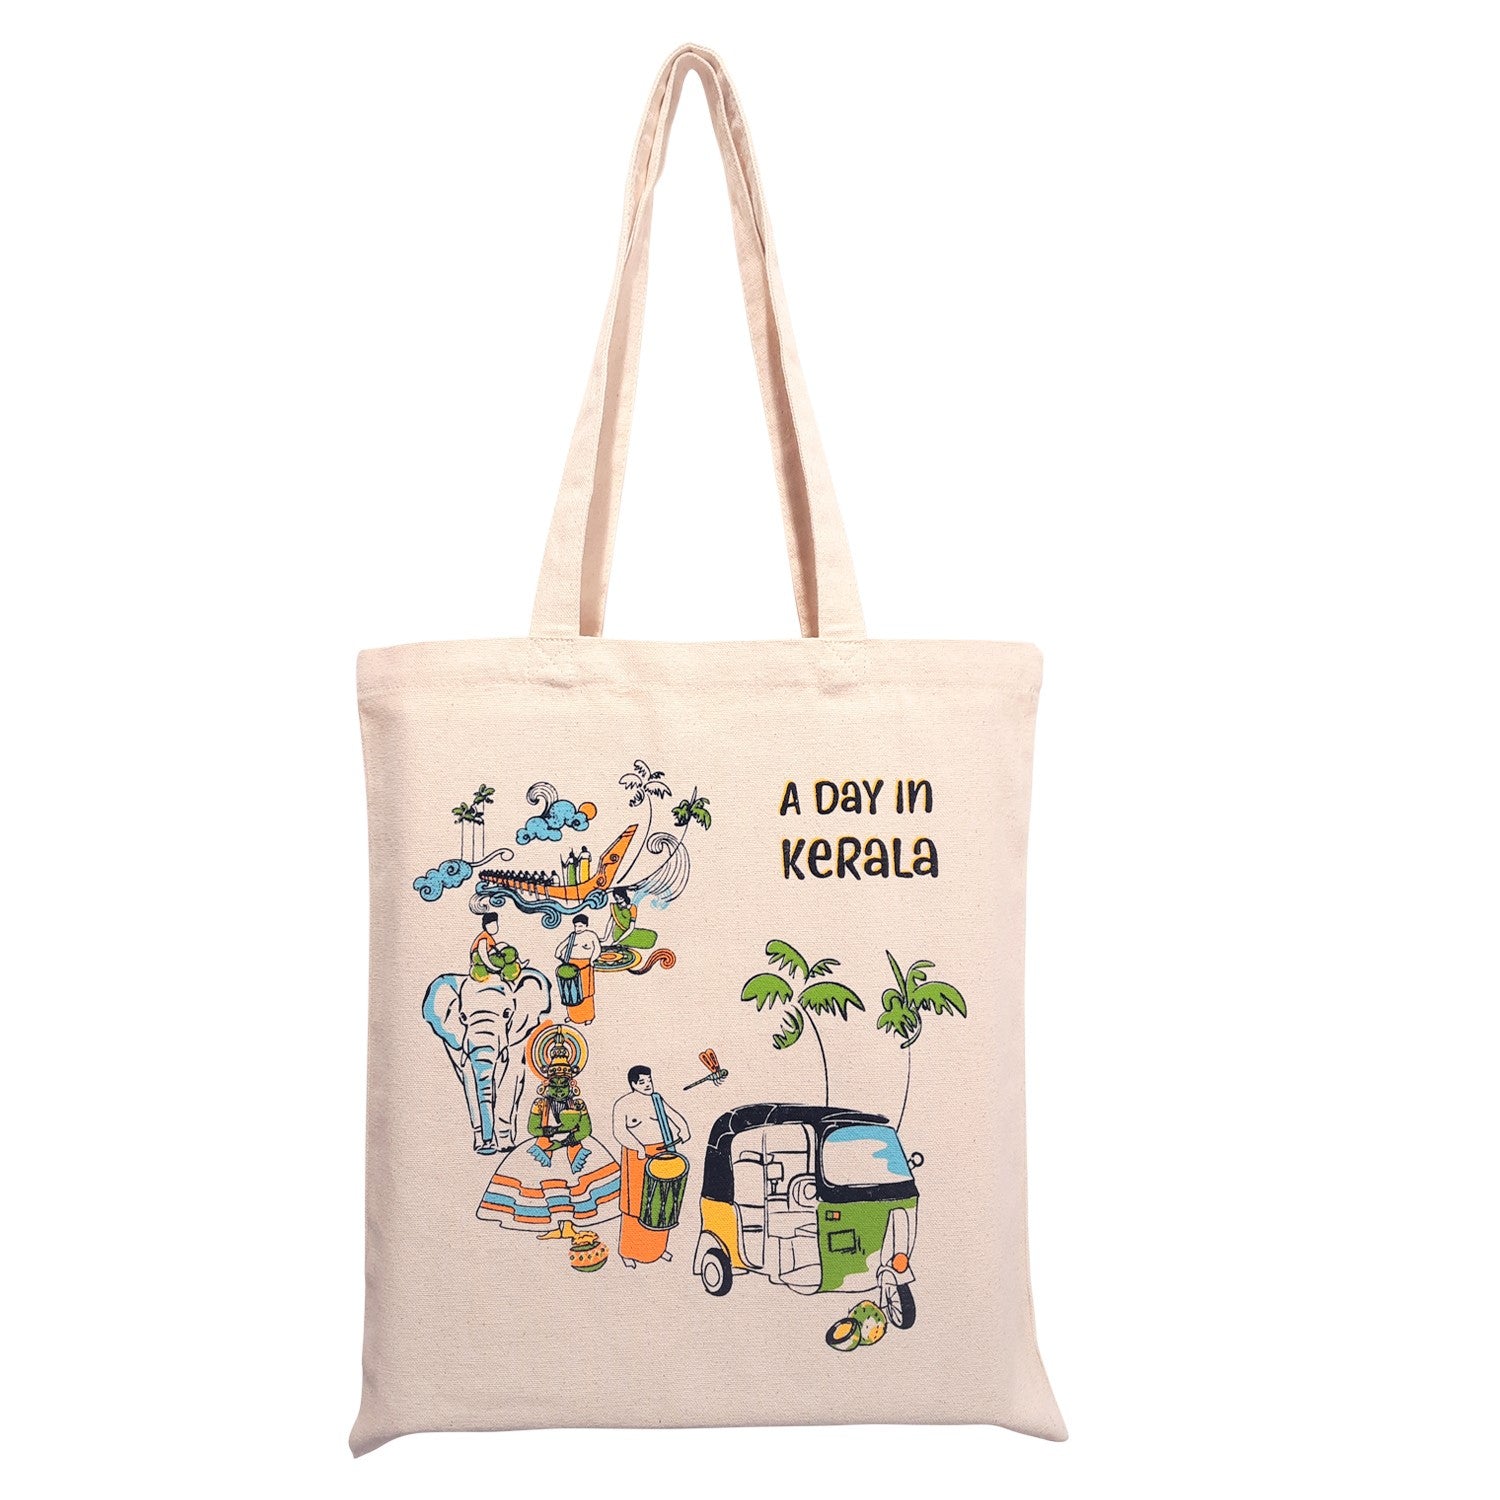 How Are Tote Bags Good For The Environment?